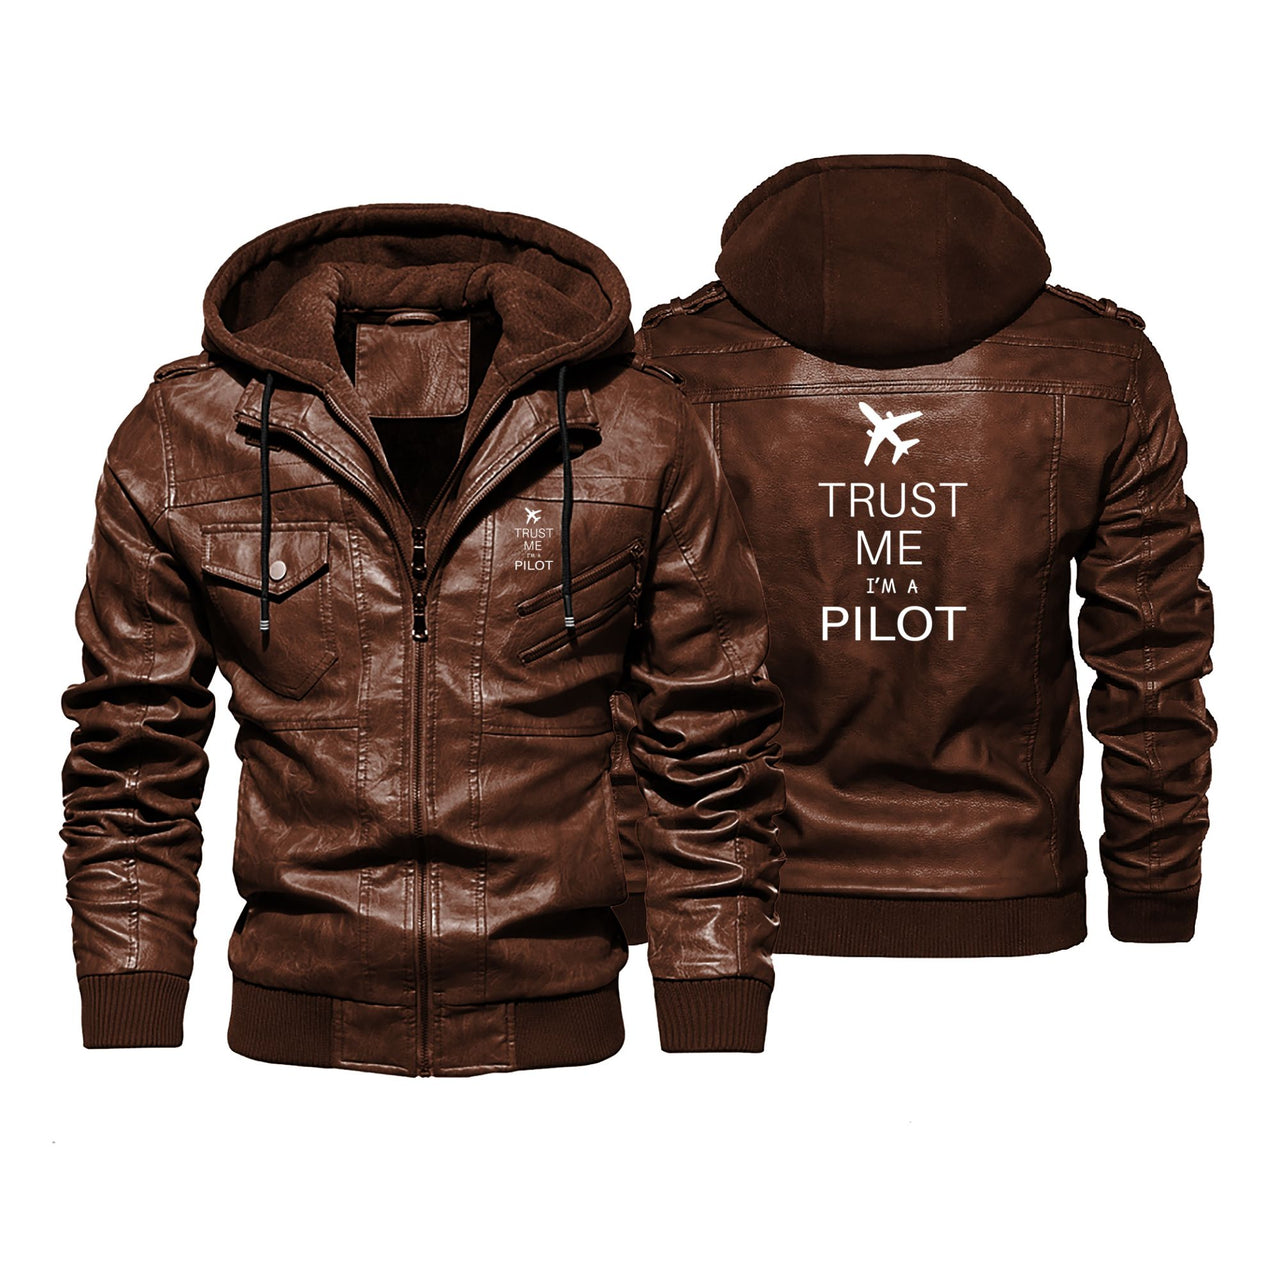 Trust Me I'm a Pilot 2 Designed Hooded Leather Jackets